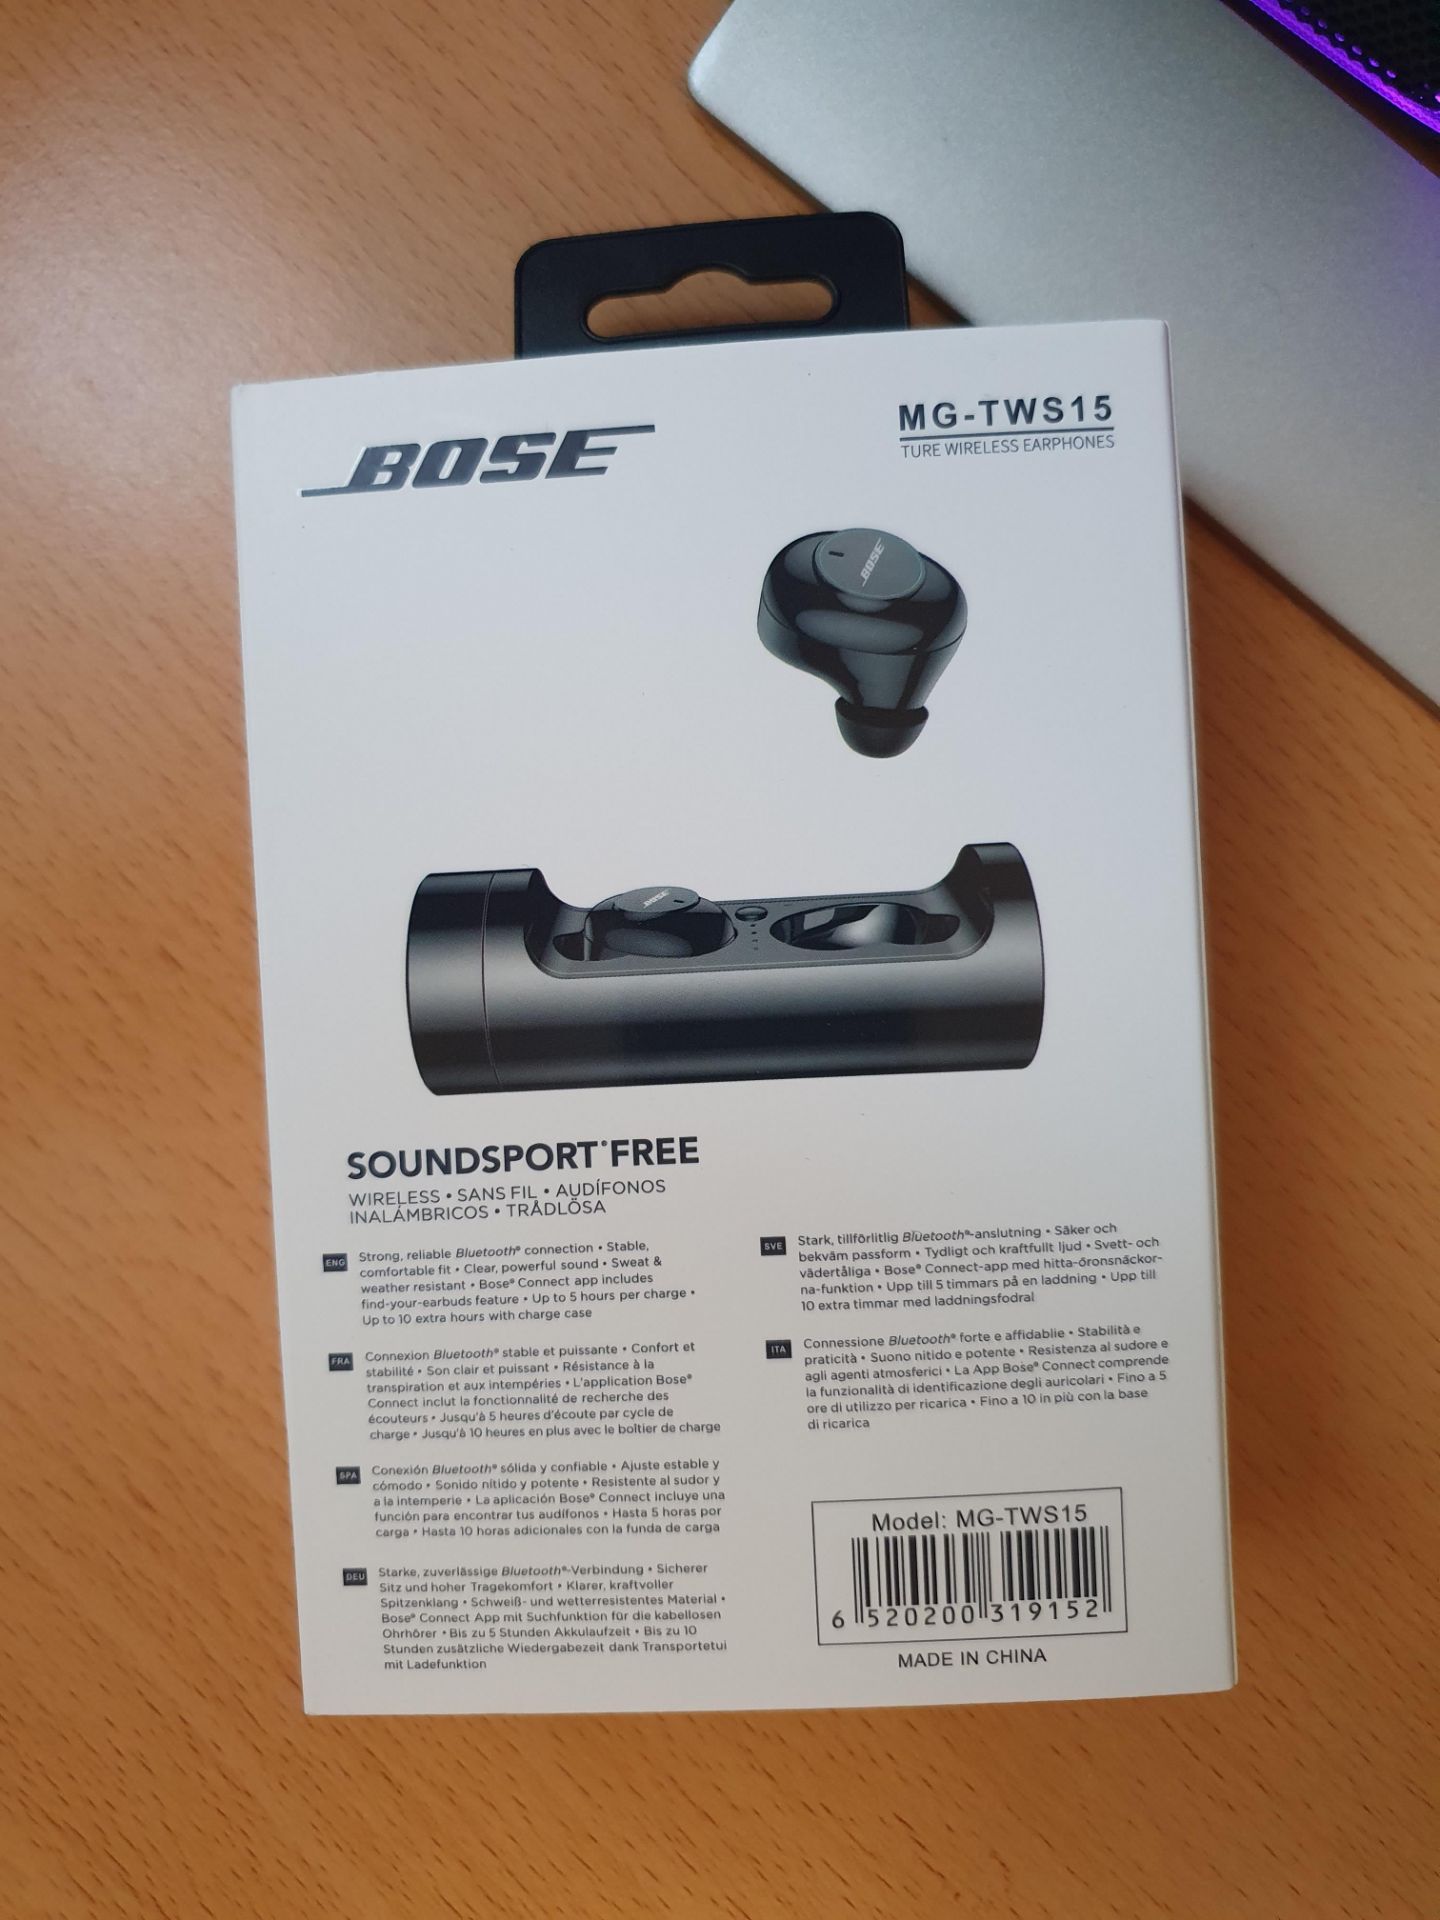 new bose mg-tws15 limited edition bluetooth earphones black rrp £249 - Image 2 of 2